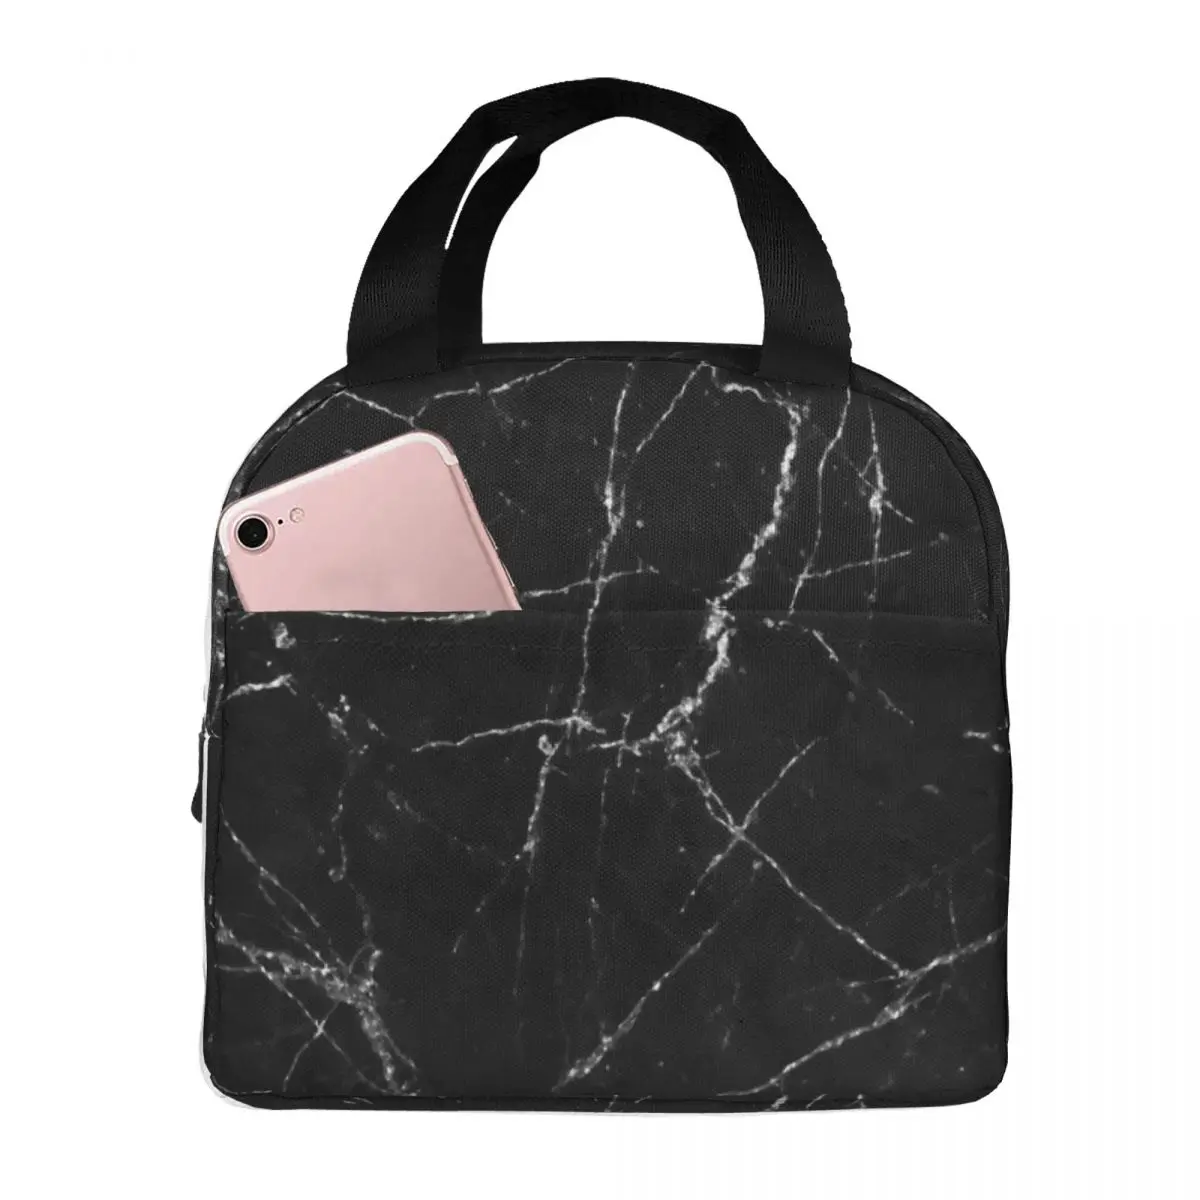 Lunch Bags for Men Women White Gold On Black Marble Insulated Cooler Portable School Modern Oxford Lunch Box Handbags